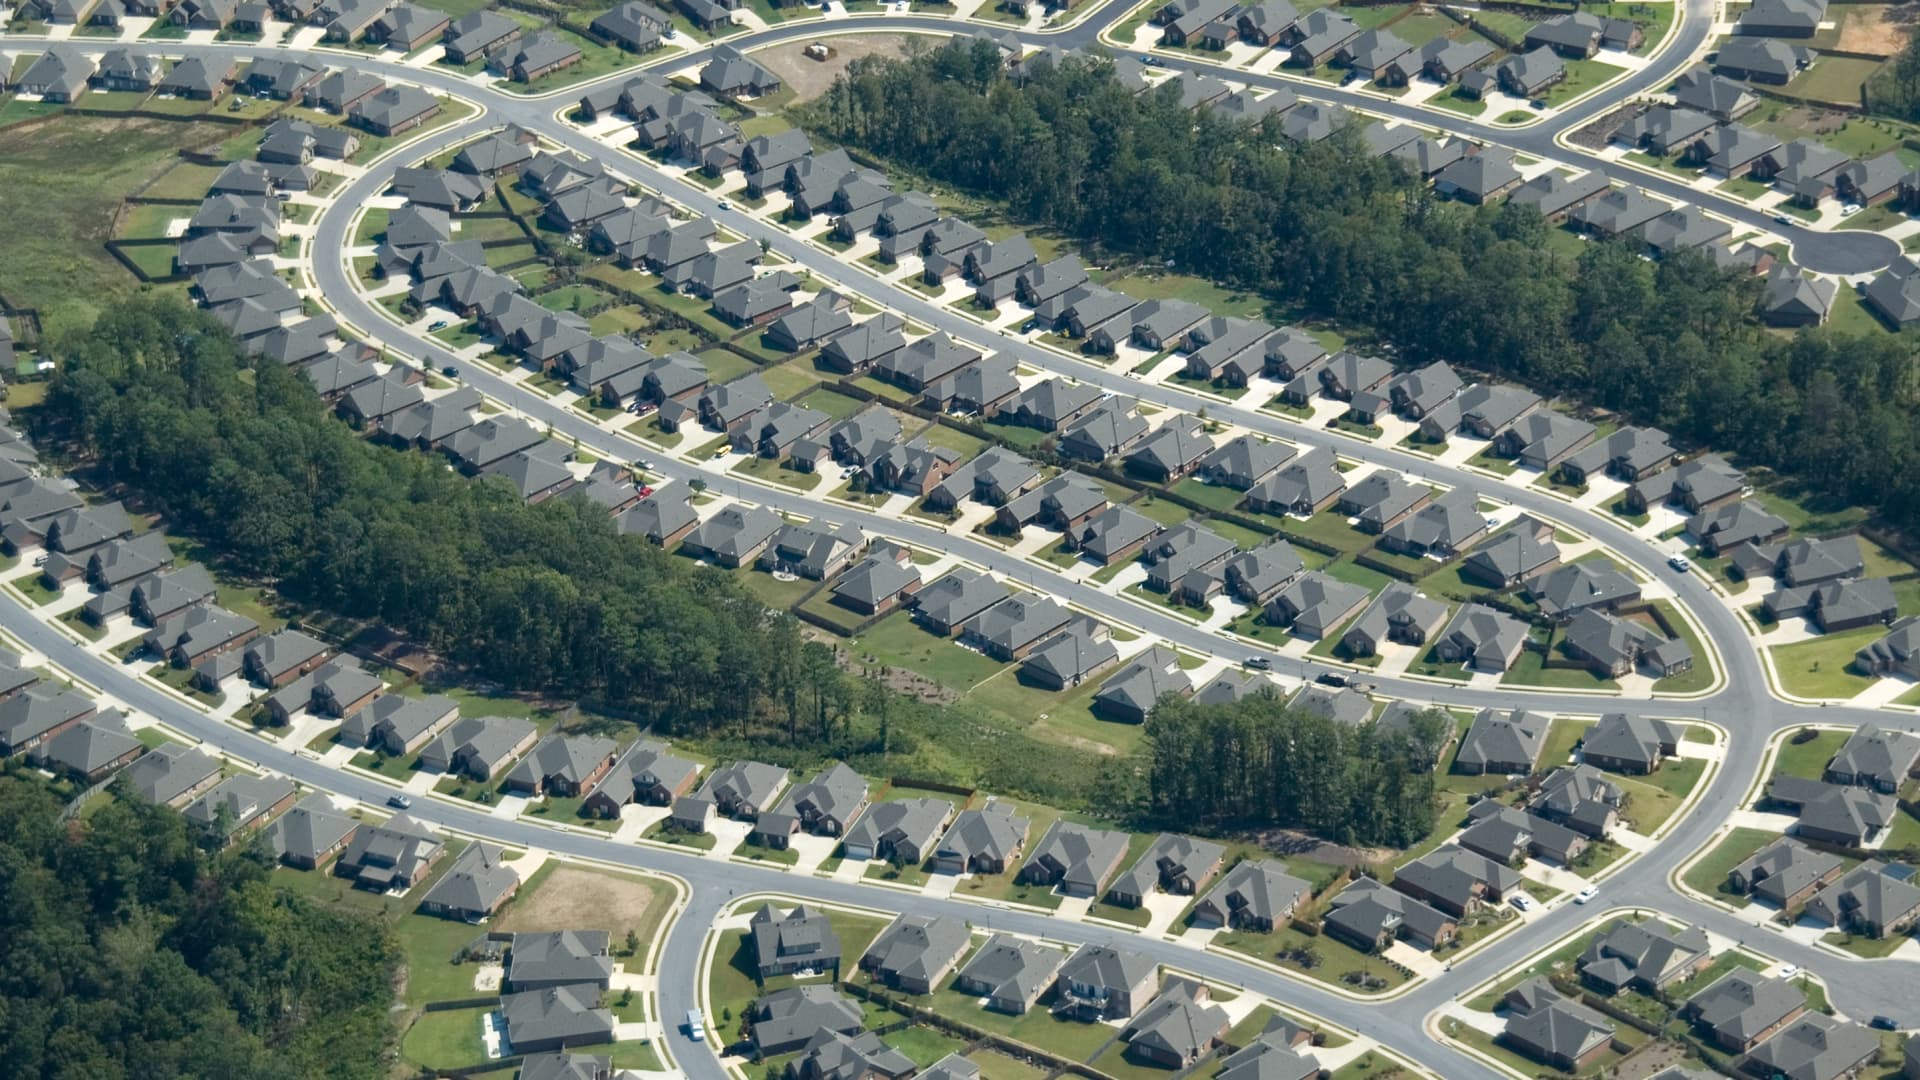 Aerial abstract view of homes in the suburb in Birmingham, Alabama.